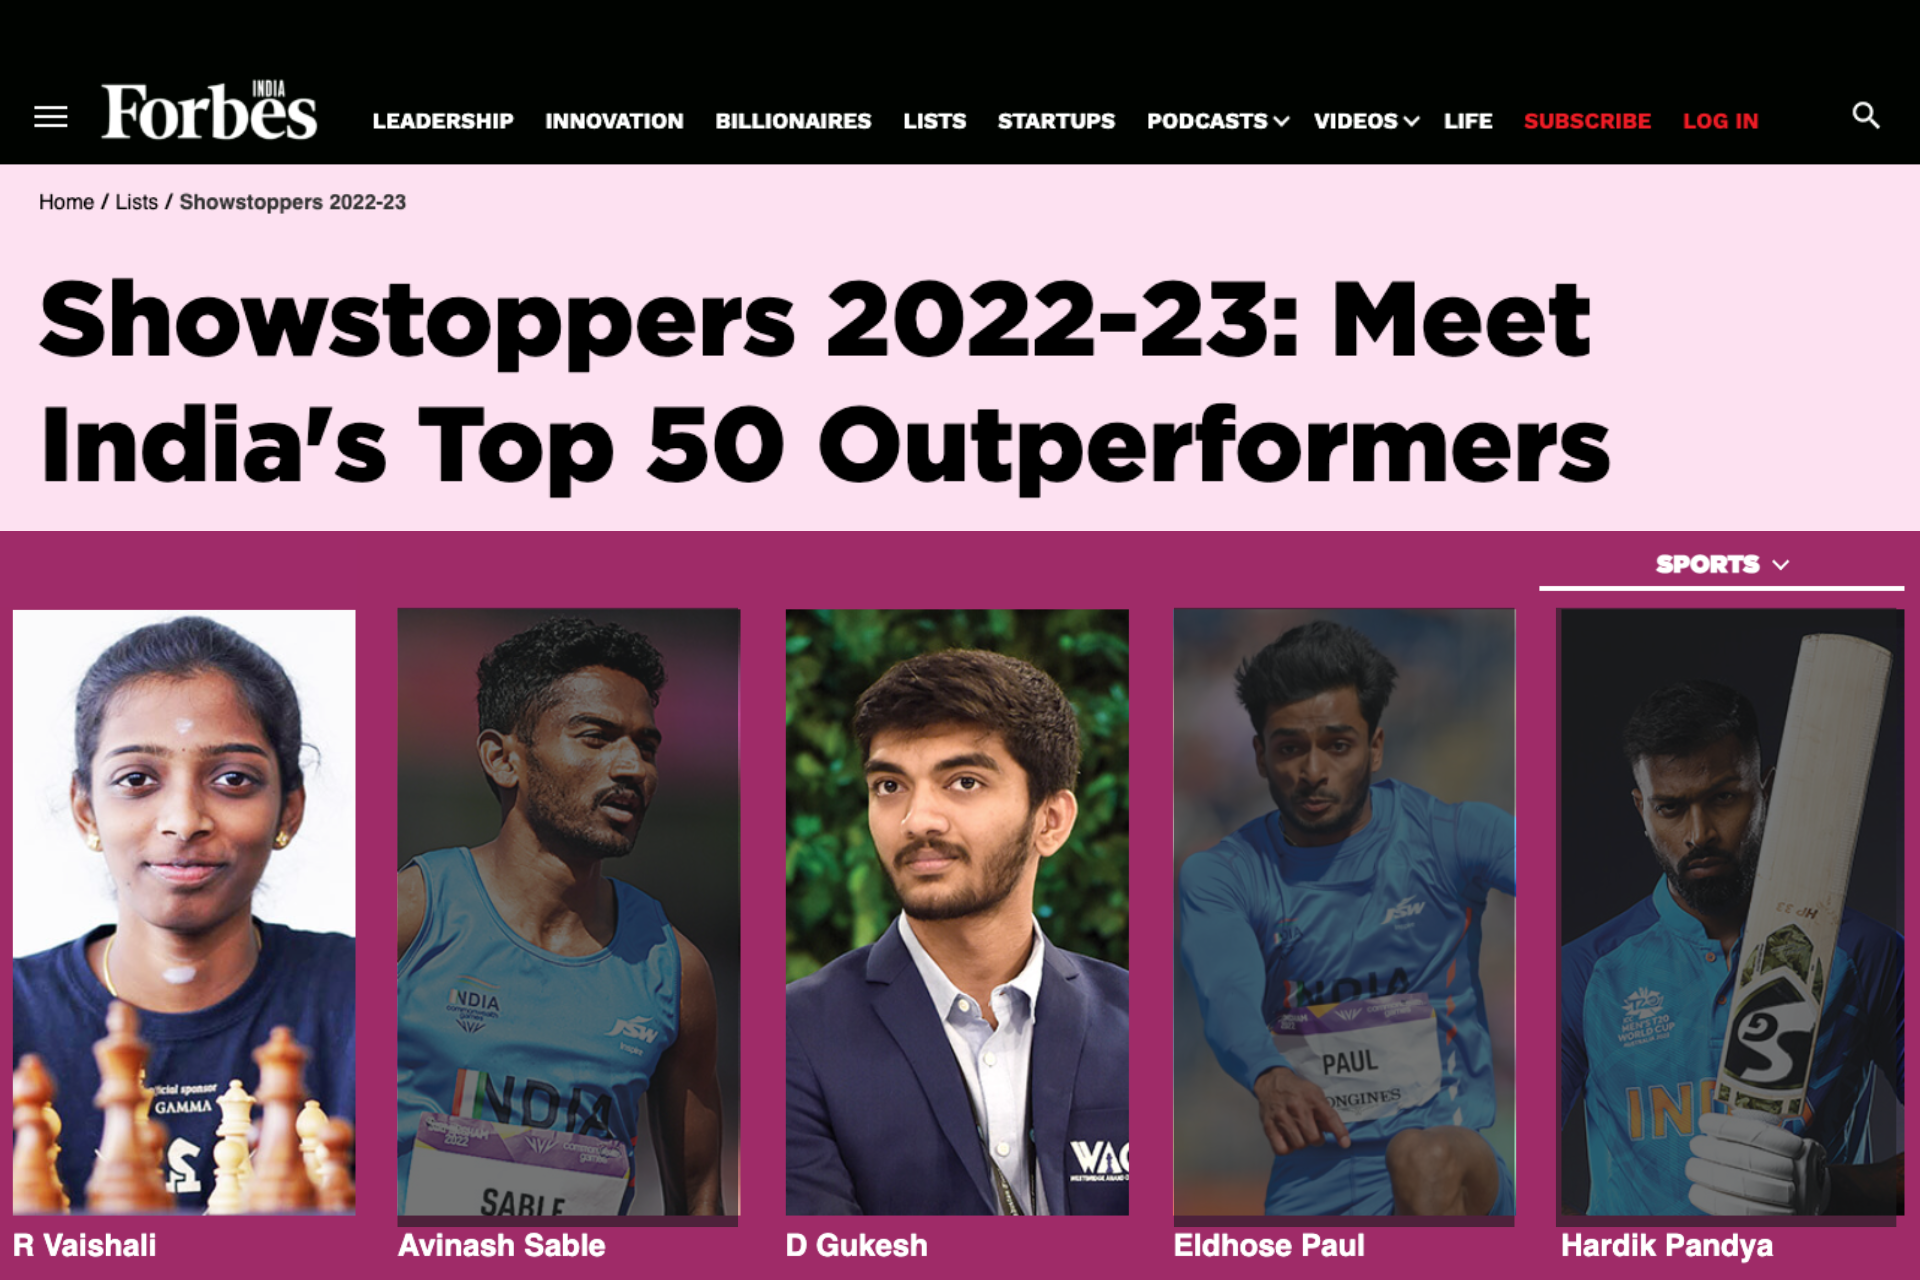 Forbes India: Gukesh and Vaishali are on the 2022-23 Showstoppers list